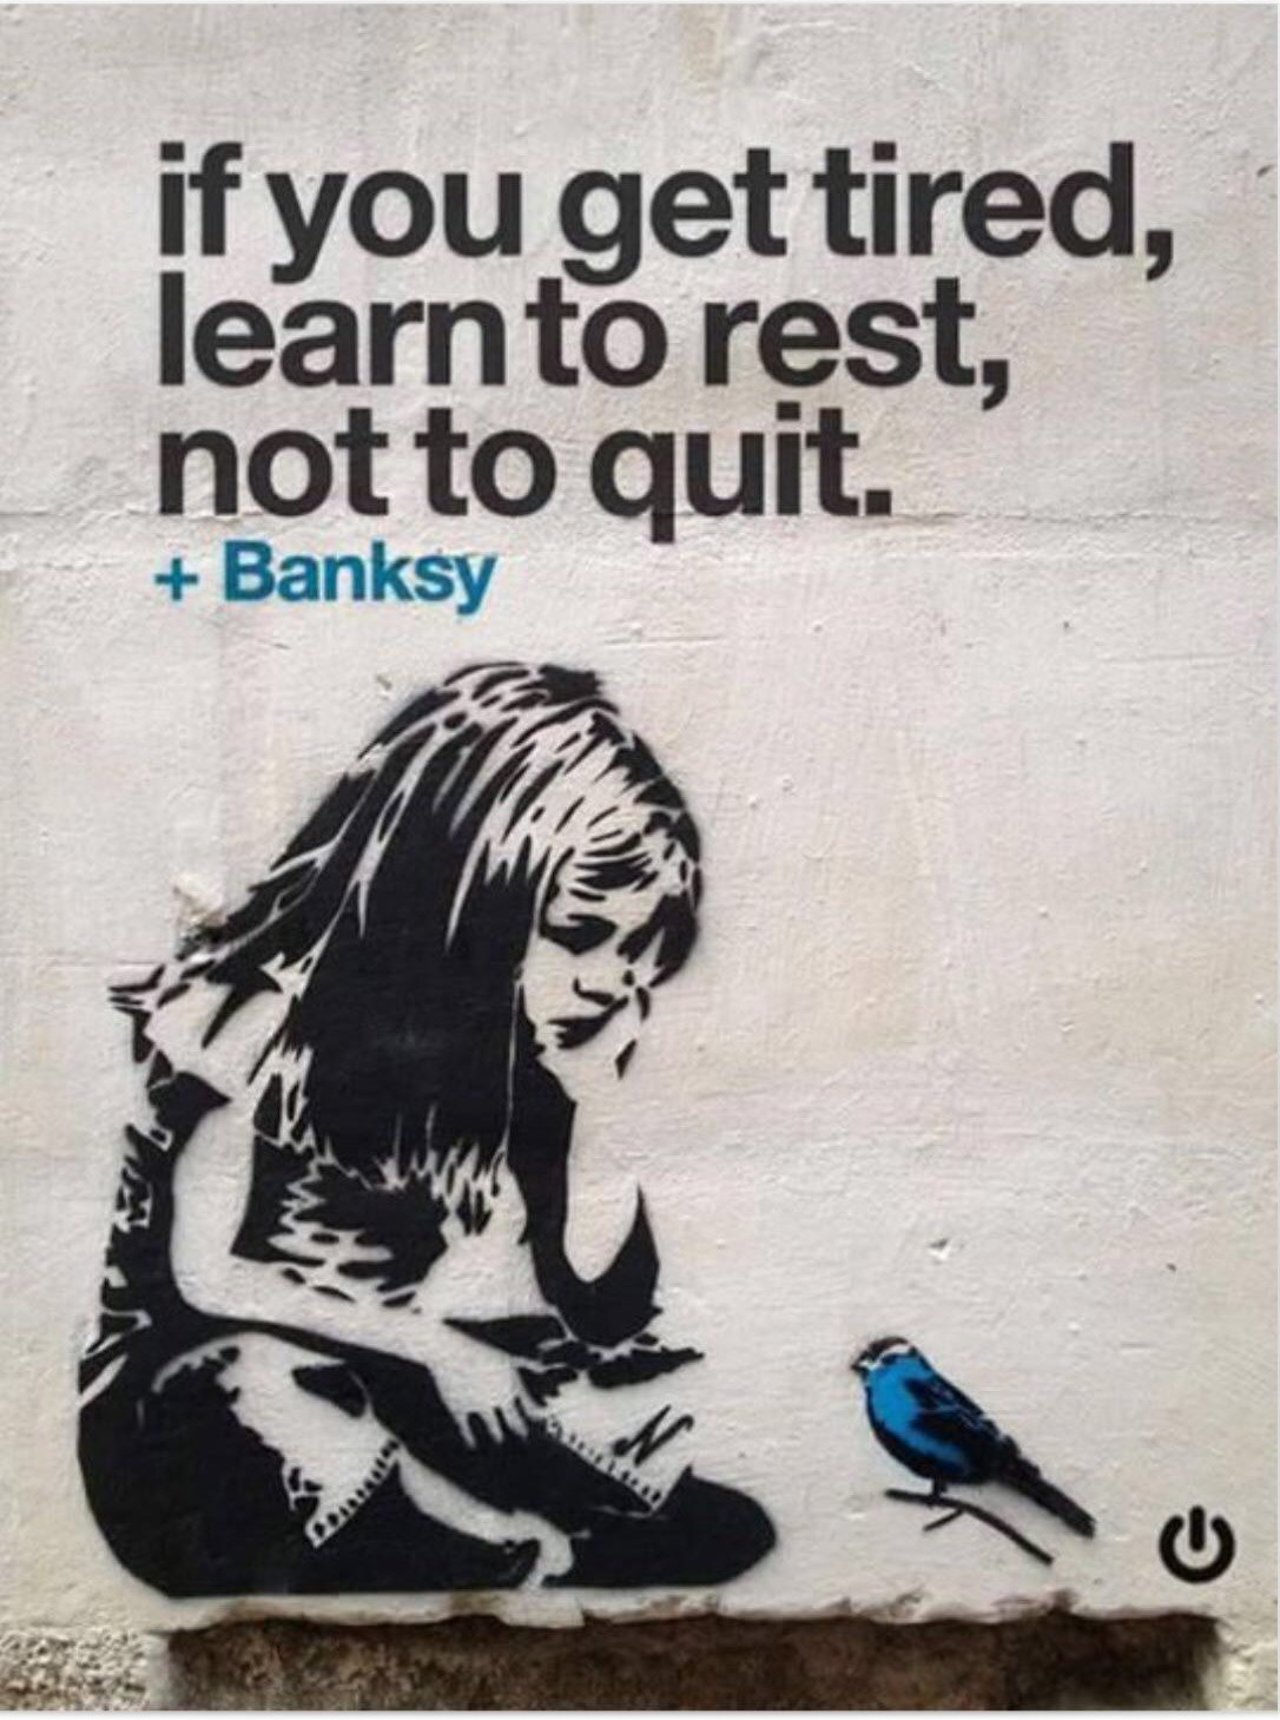 If you get tired,learn to rest, not to quit.Banksy #streetart #urbanart #graffiti #mural https://t.co/x9UPVWbHw3